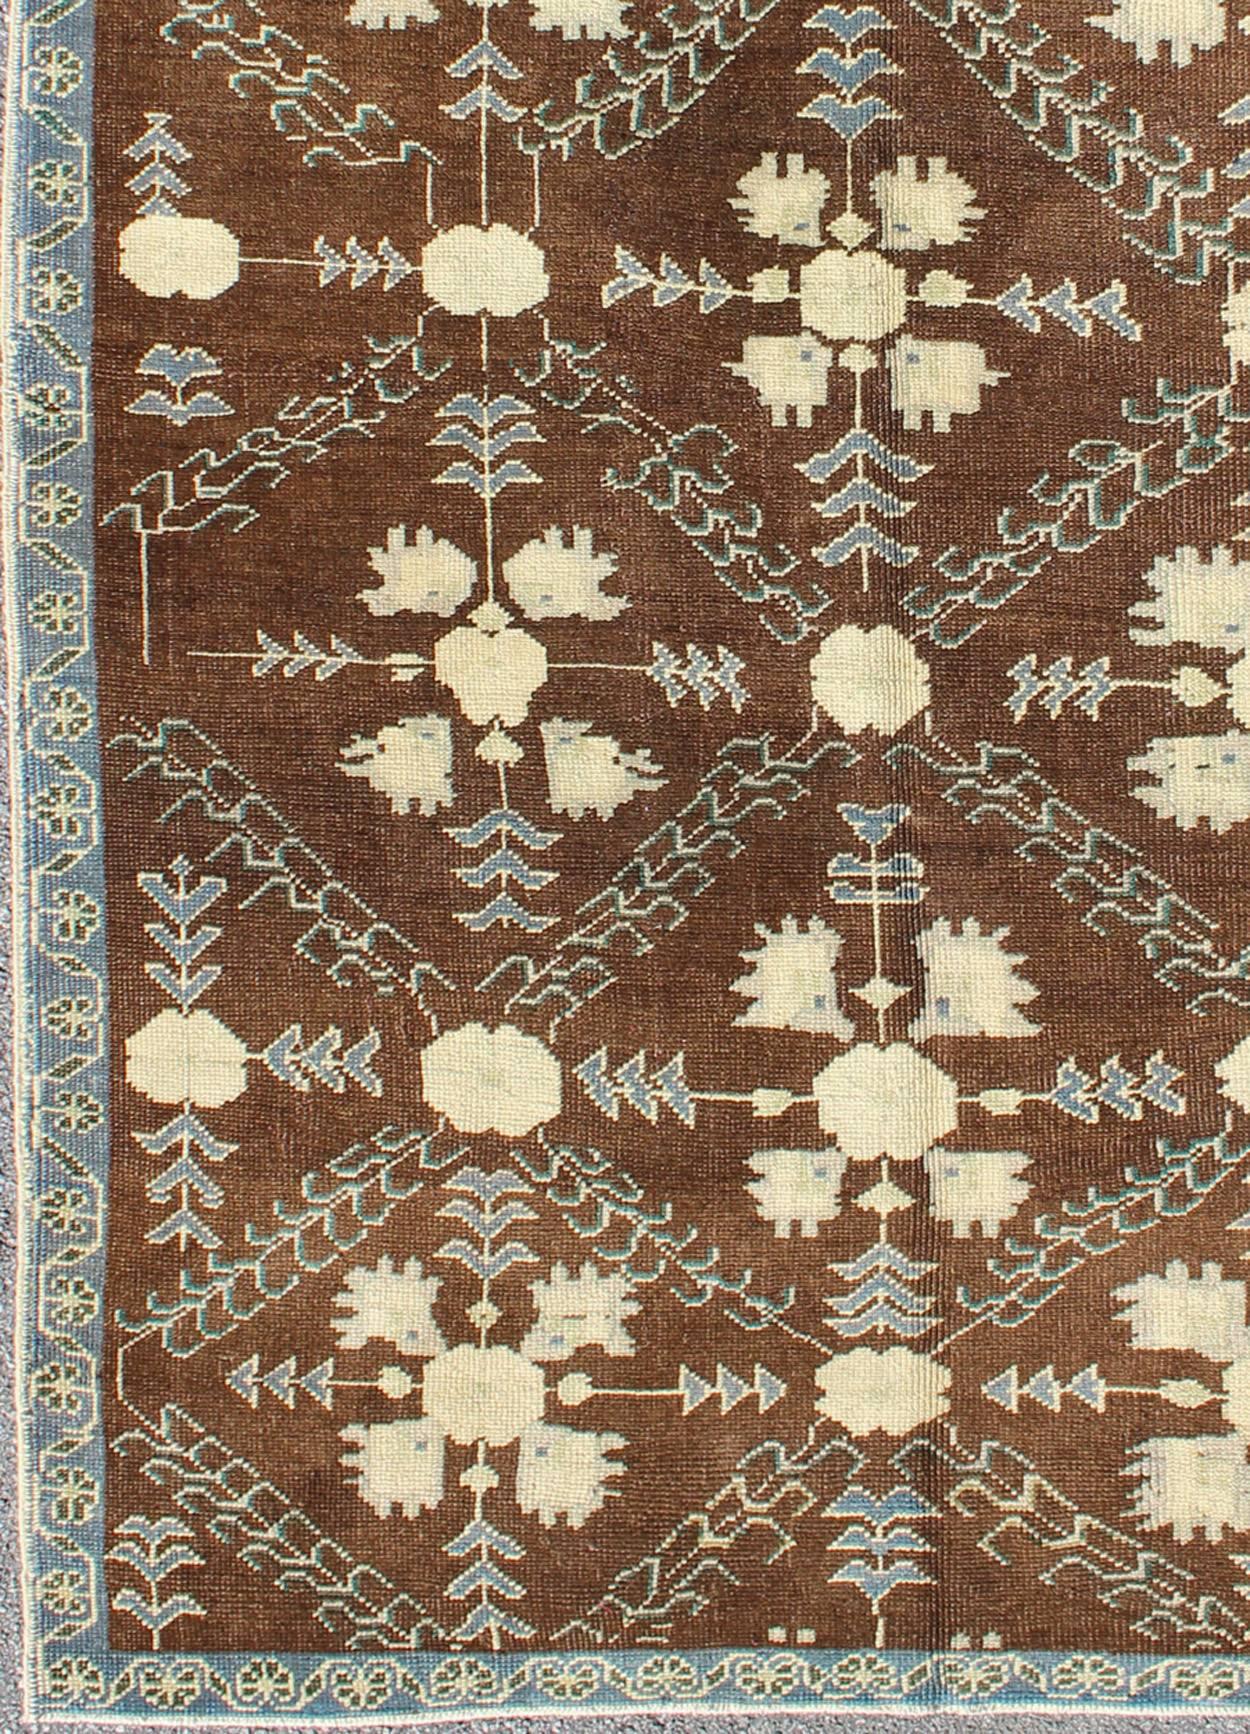 This piece features a stunning chocolate background with an all-over pattern in blue and ivory with hints of green. The blue border has a small repeating flower design. 
Measures: 5' x 9'4